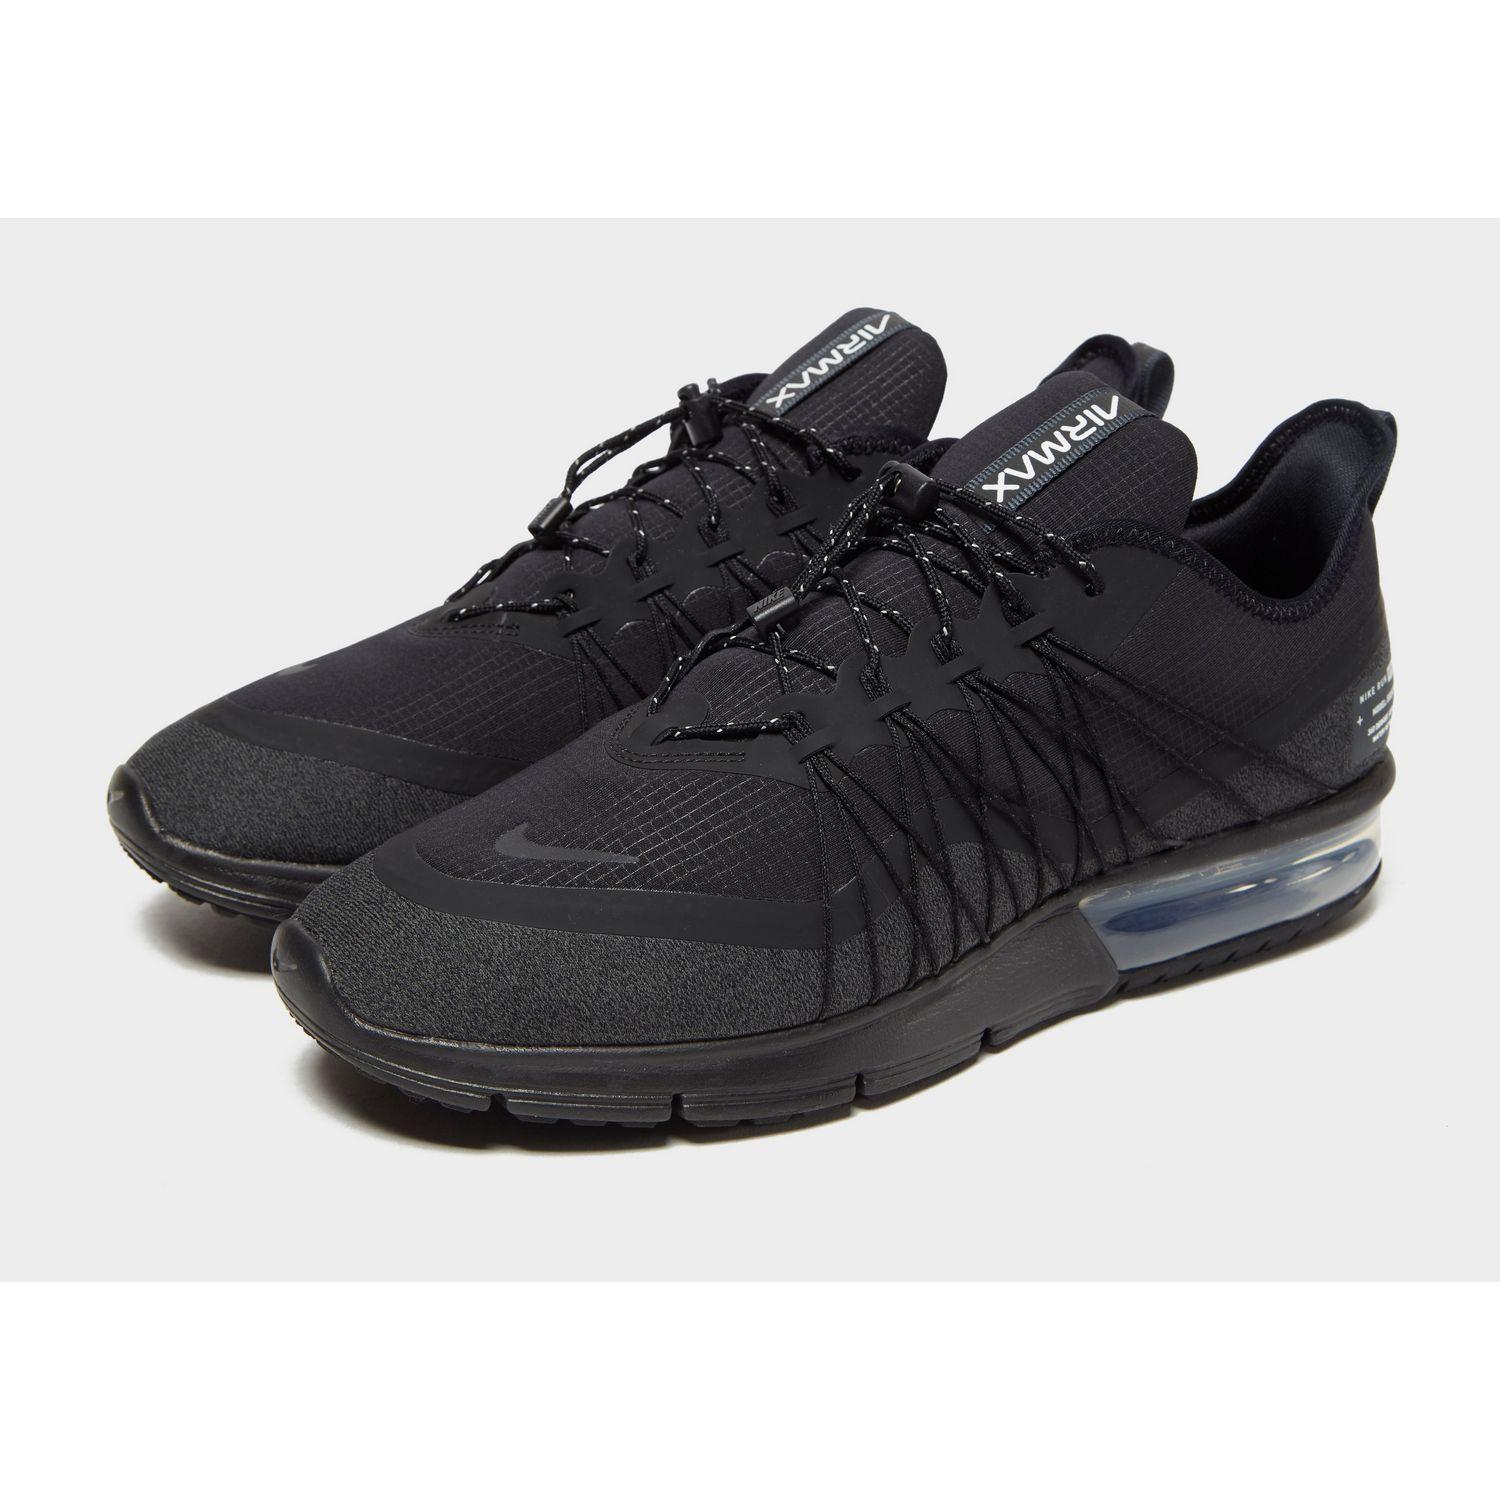 Nike Synthetic Air Max Sequent 4 Shield 